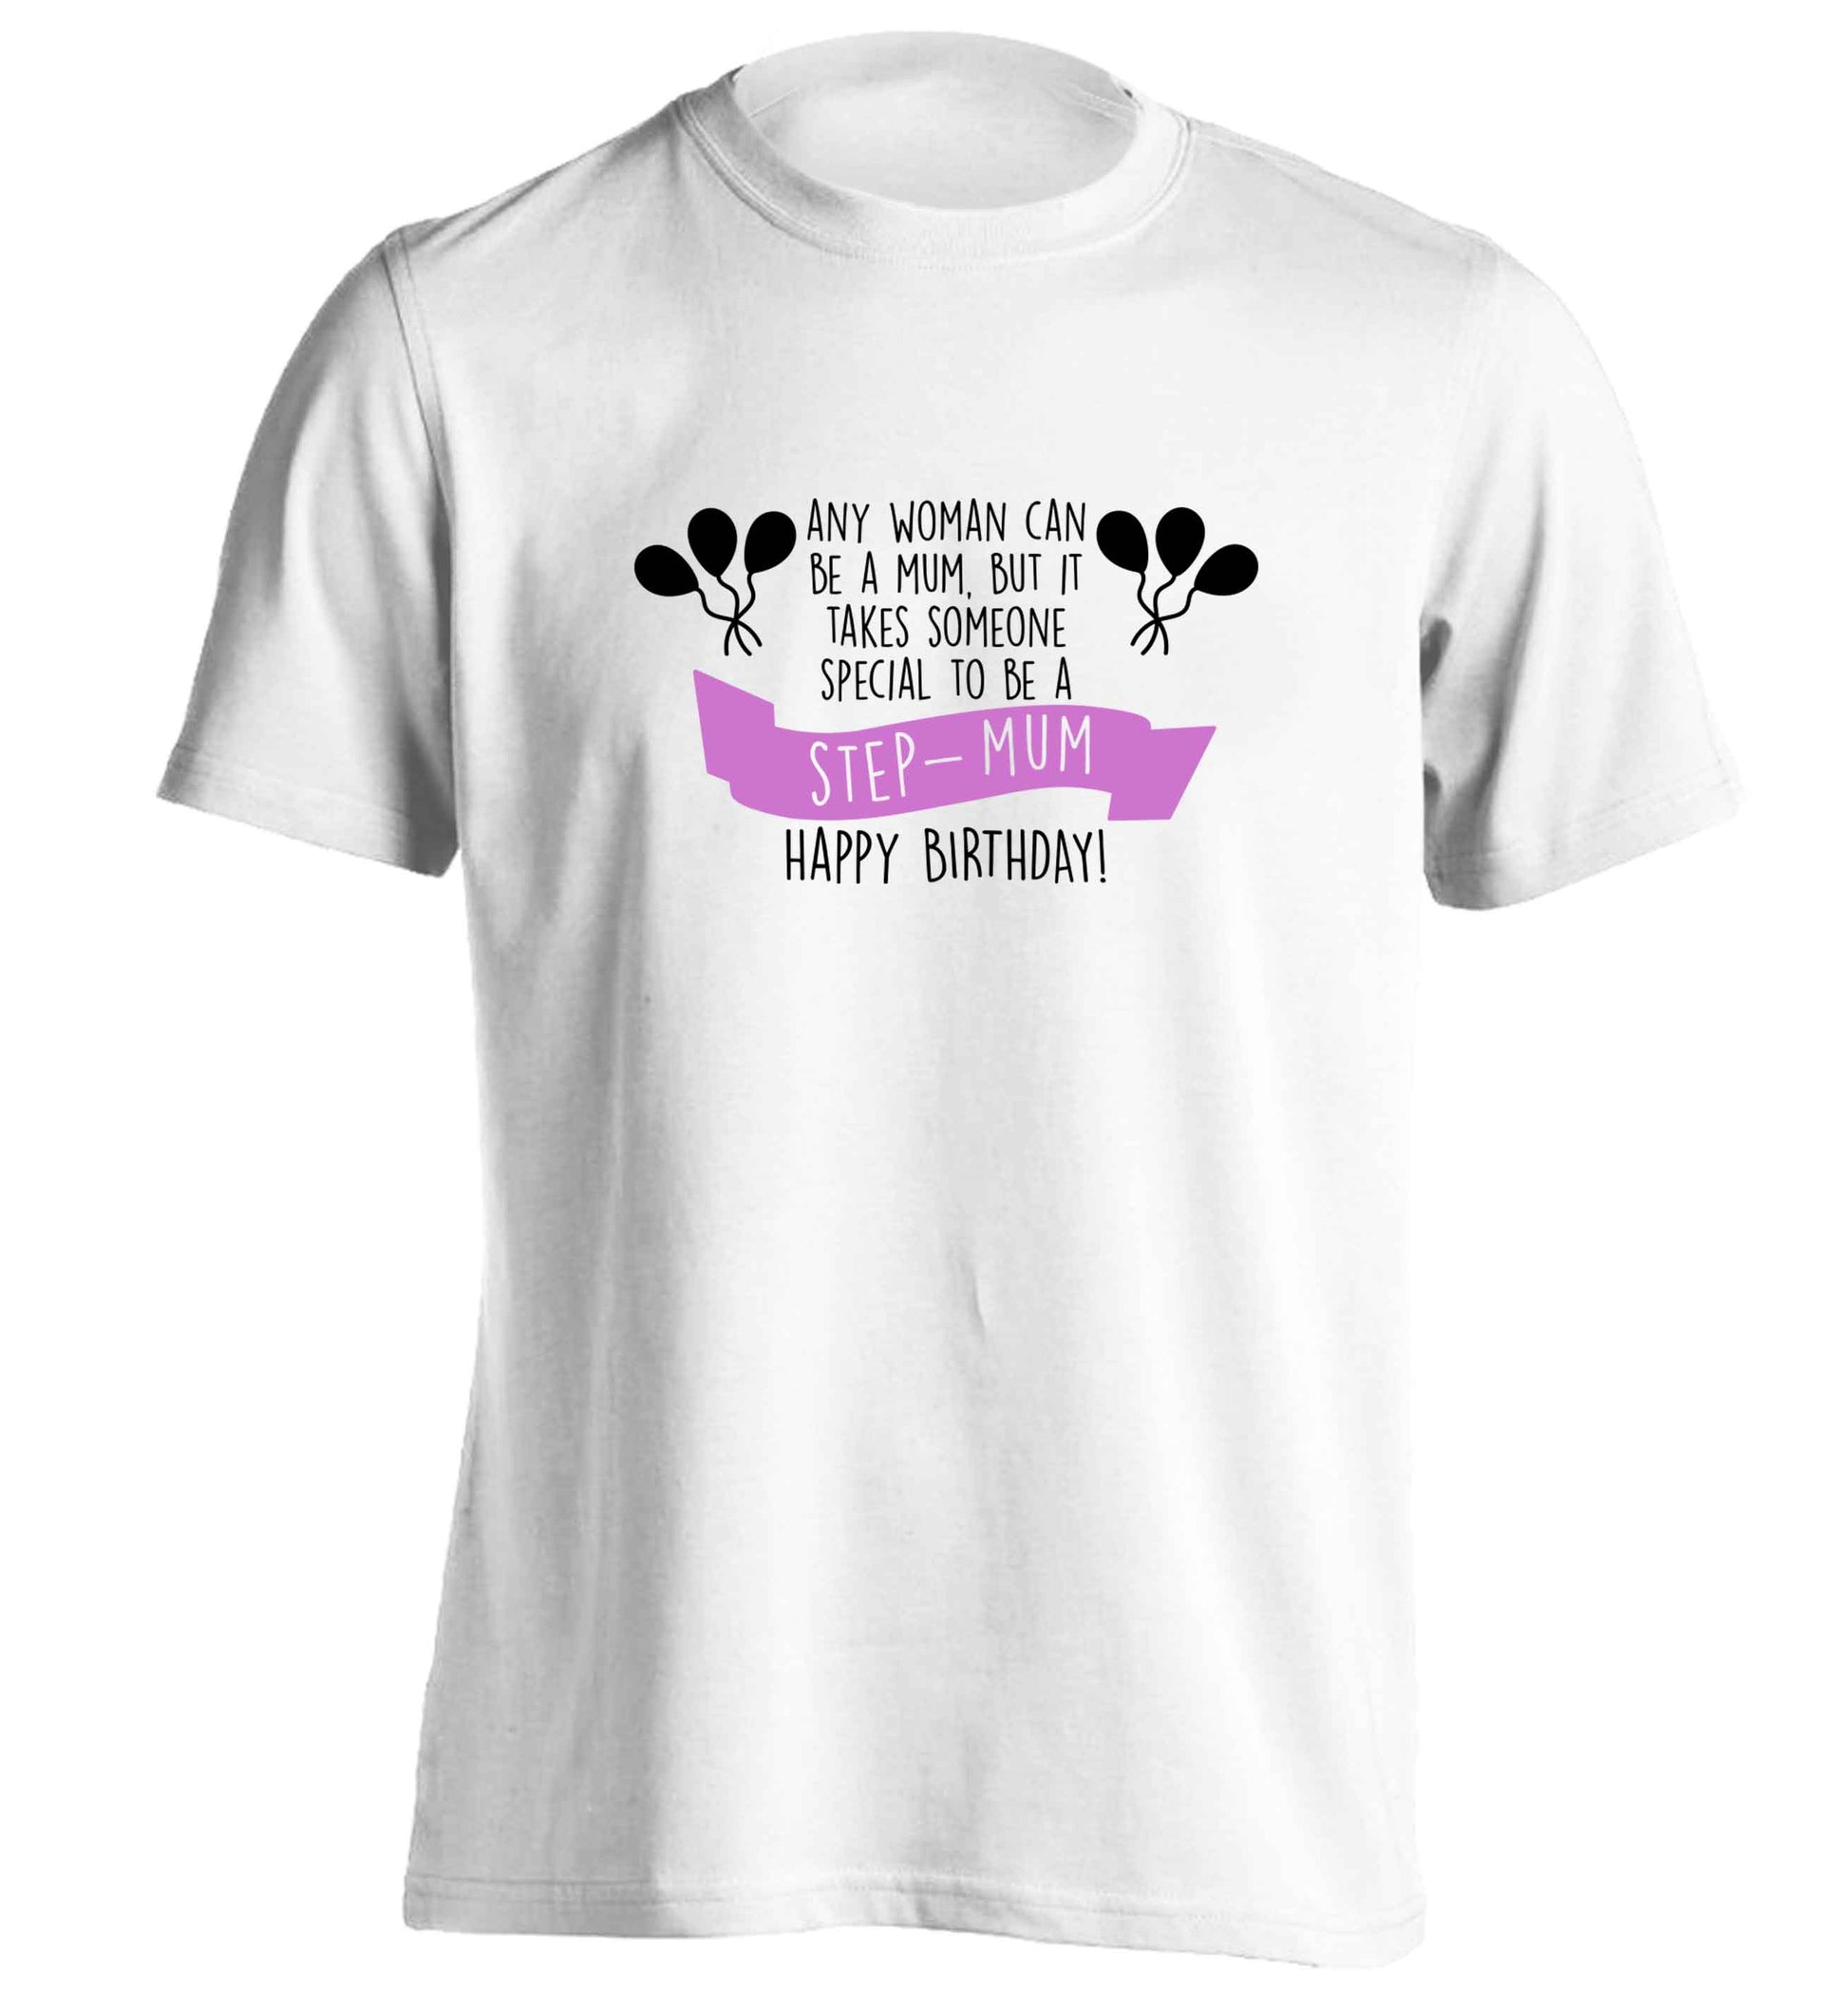 Takes someone special to be a step-mum, happy birthday! adults unisex white Tshirt 2XL